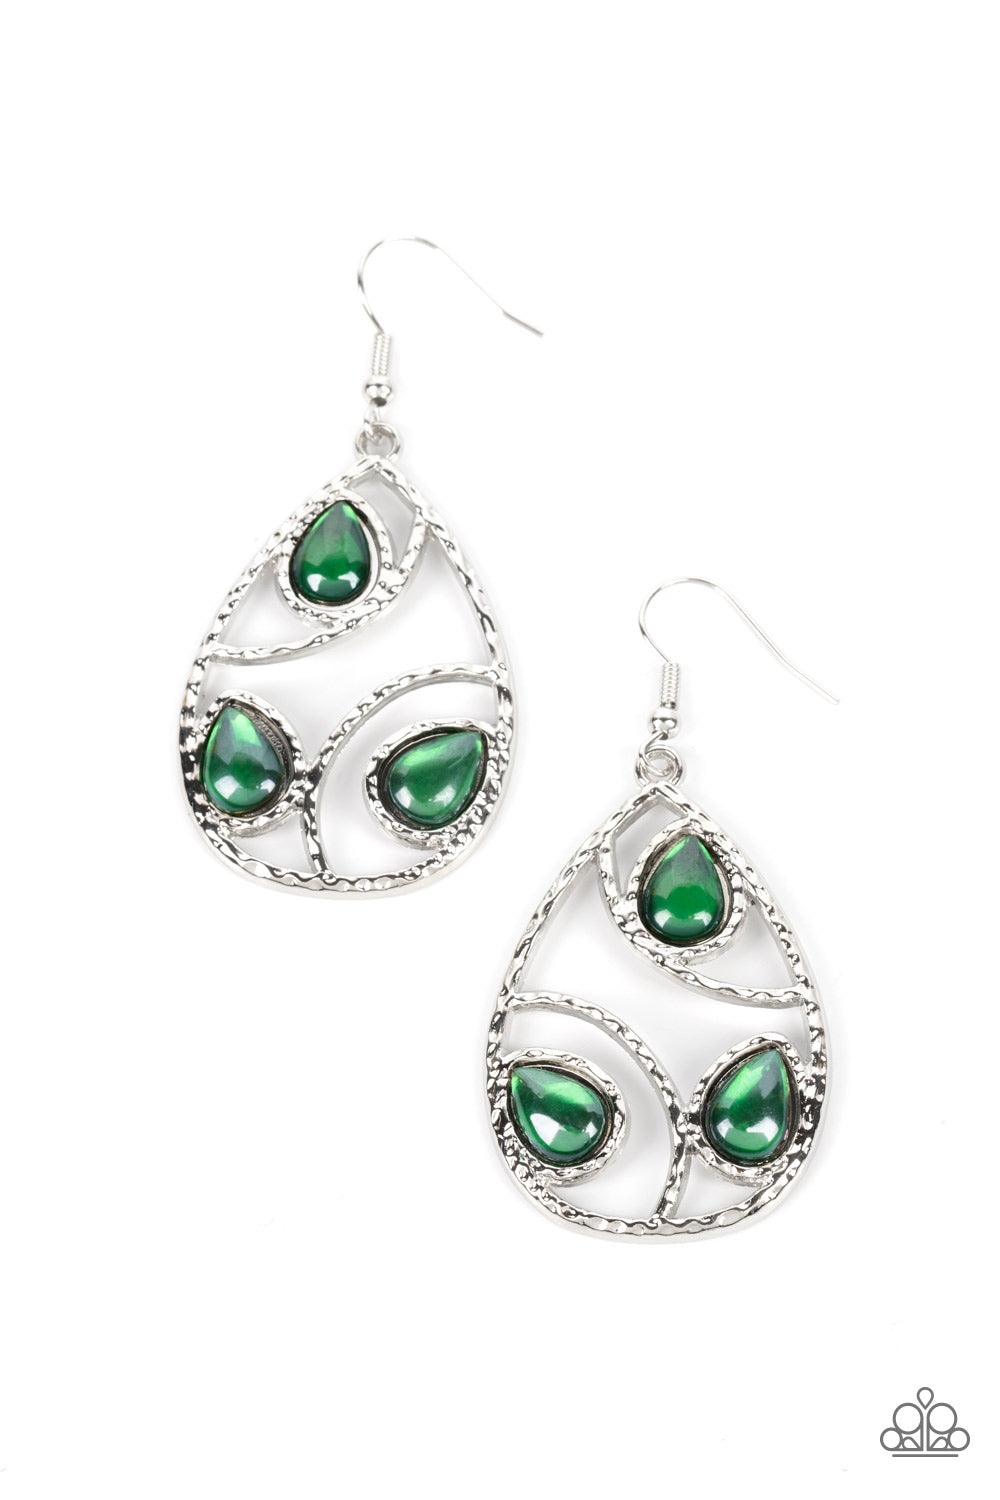 Send the BRIGHT Message - Green and Silver Earrings - Paparazzi Accessories - A glassy finish, glimmering light siam teardrop beads adorn the center of an airy silver teardrop frame. Hammered in shimmer, arcing silver bars curve inside the frame for an abstract finish earrings.